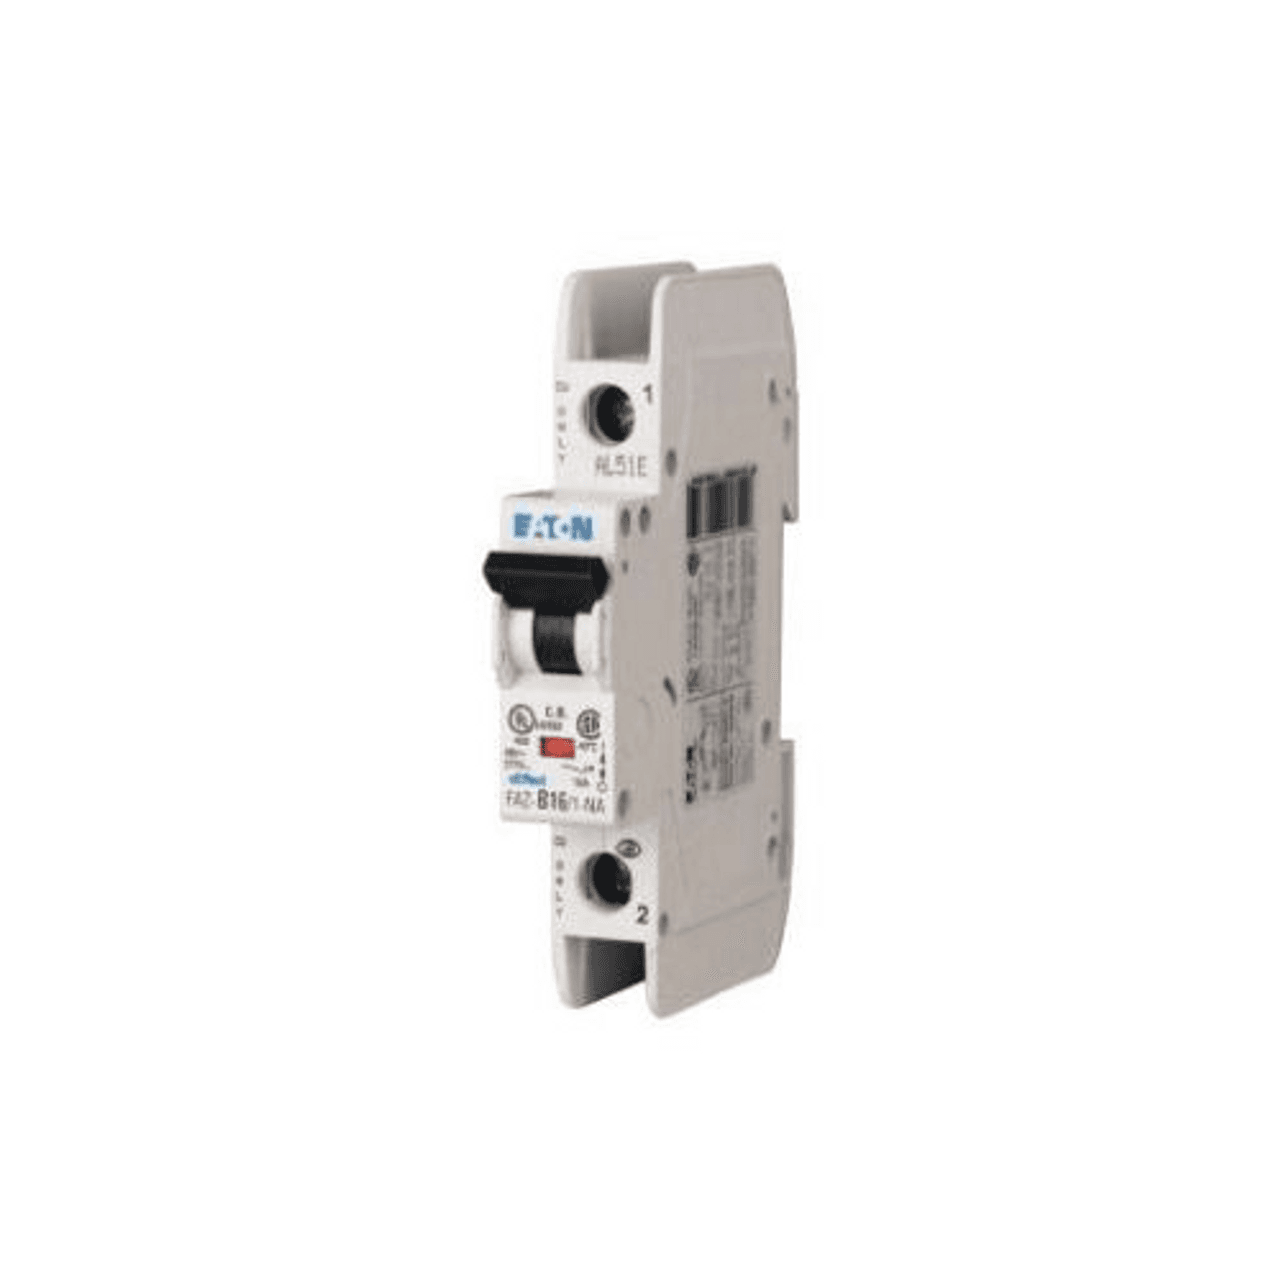 Eaton FAZ-C4/1-NA-SP Eaton FAZ branch protector,UL 489 Industrial miniature circuit breaker - supplementary protector,Single package,Medium levels of inrush current are expected,4 A,10 kAIC,Single-pole,277 V,5-10X /n,Q38,50-60 Hz,Screw terminals,C Curve